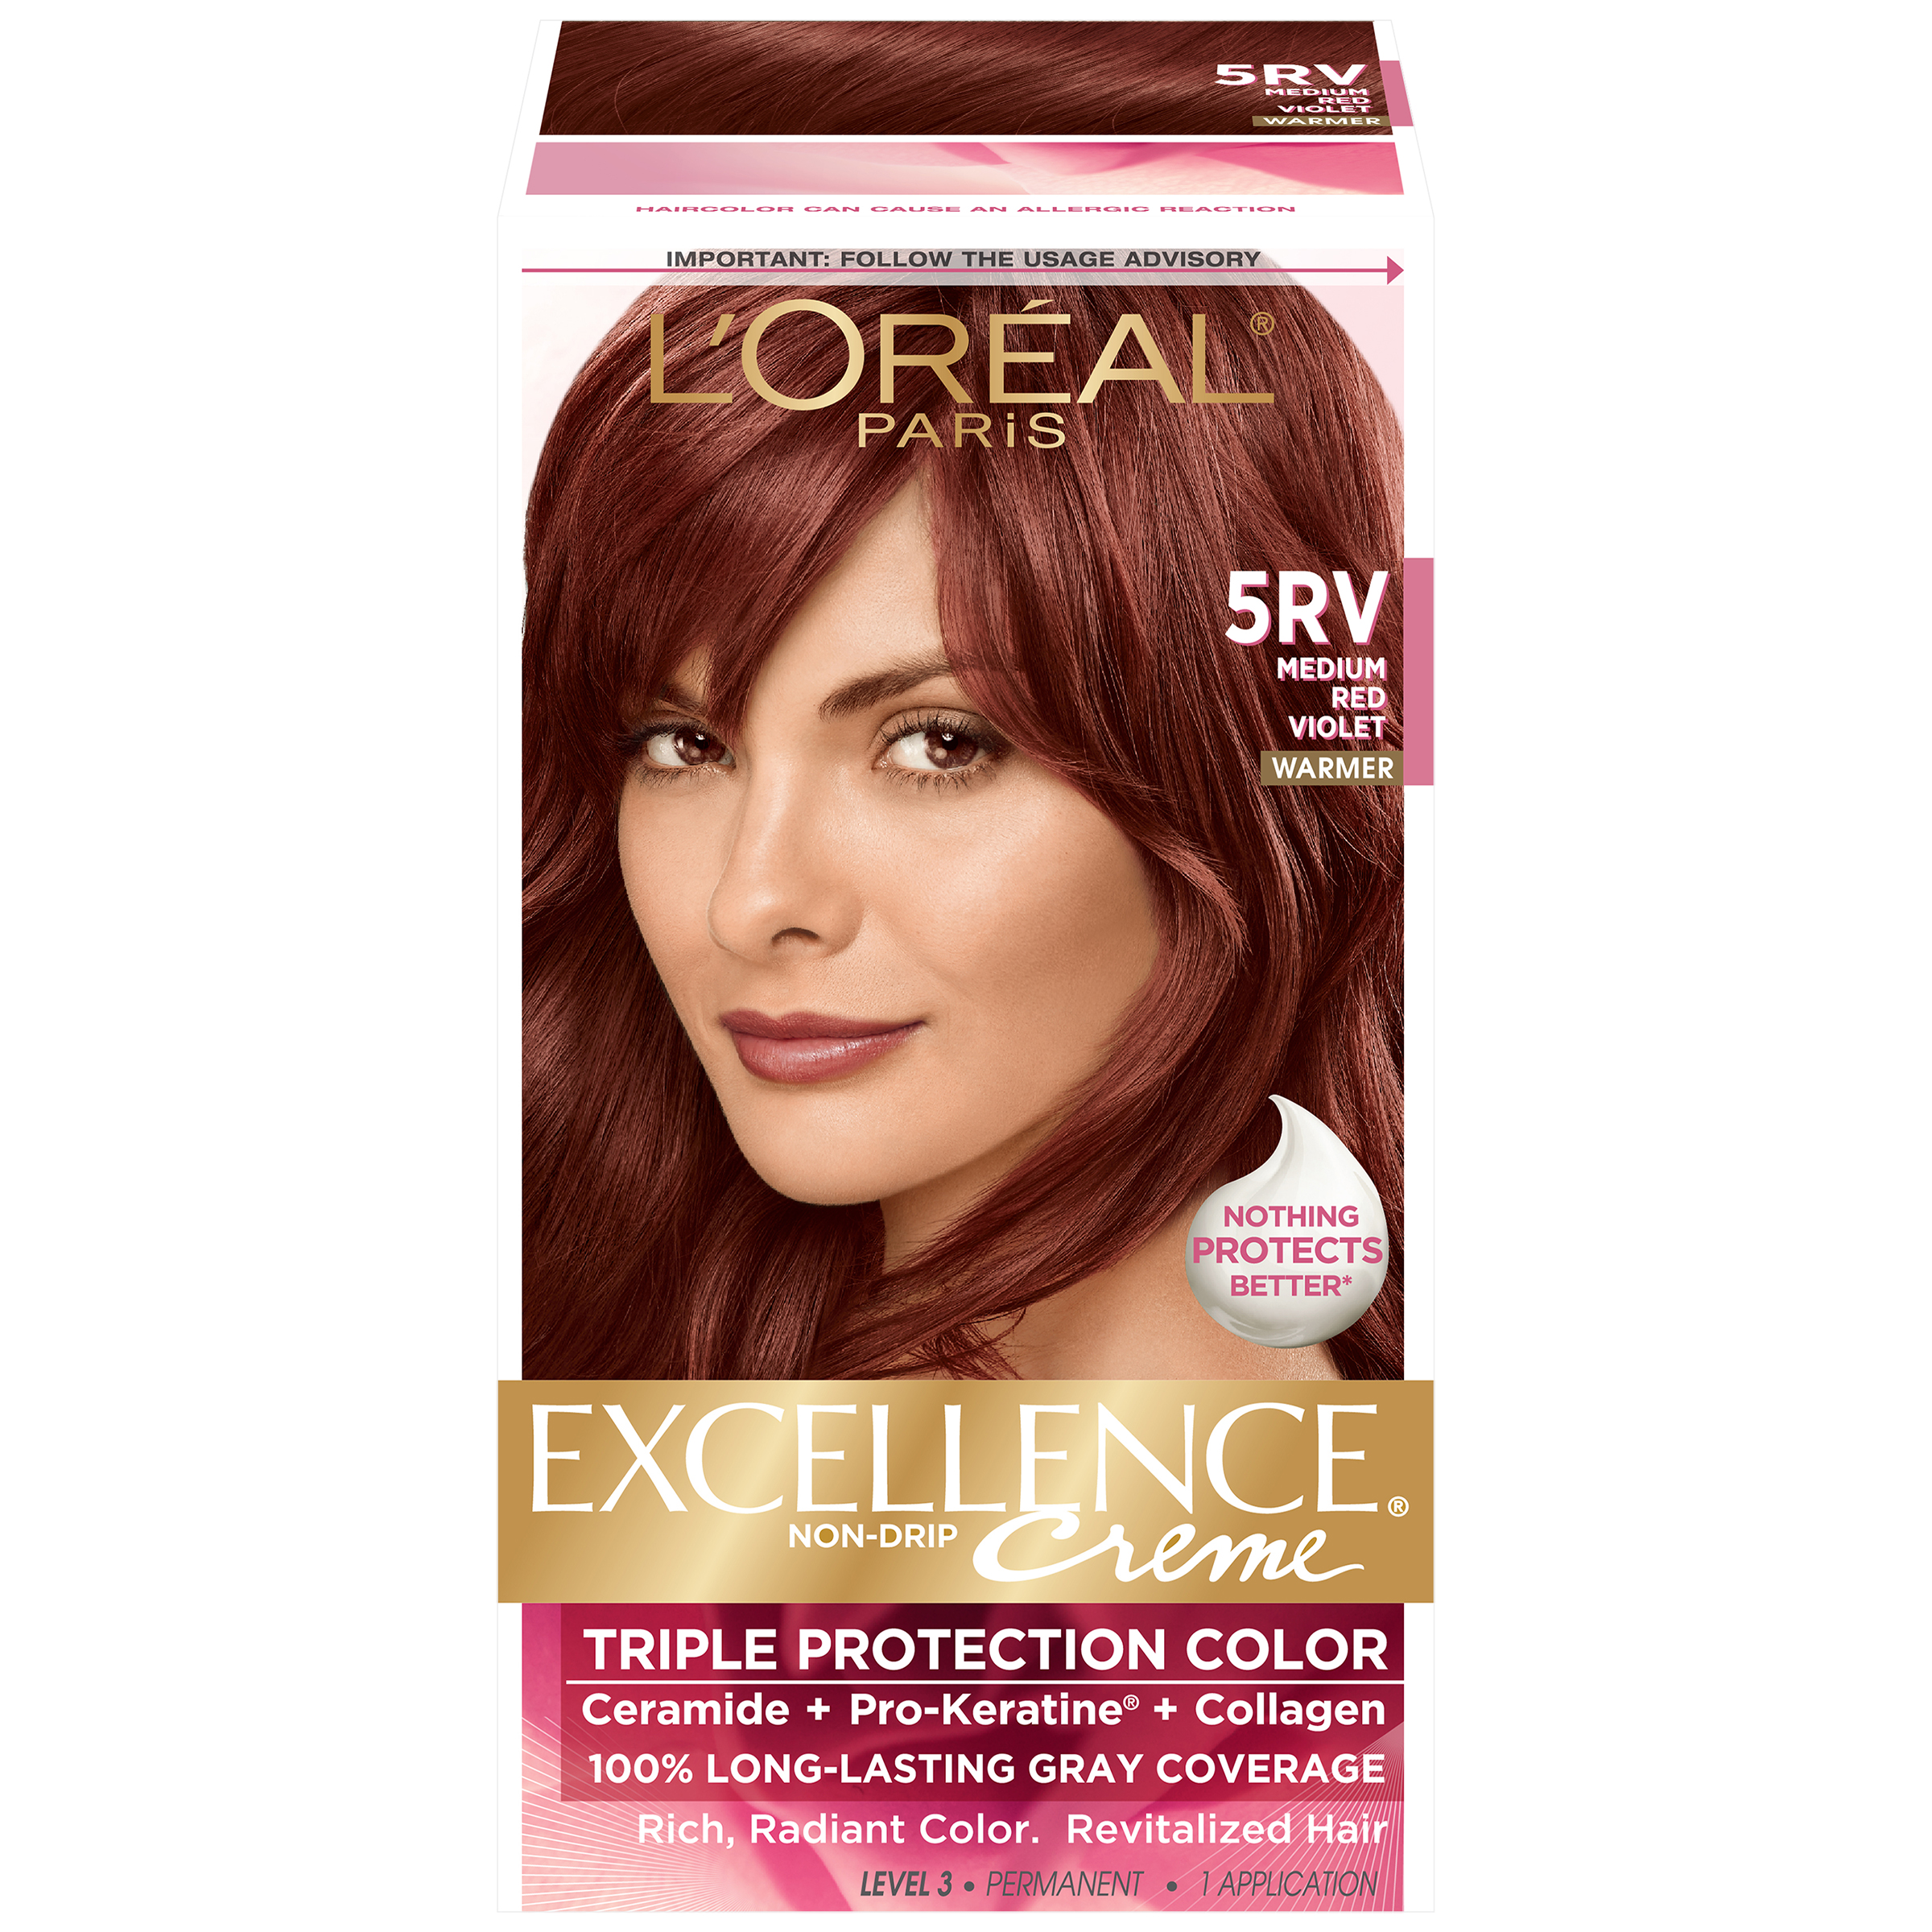 LOreal Triple Protection 5RV Warmer Medium Red Violet Hair Color